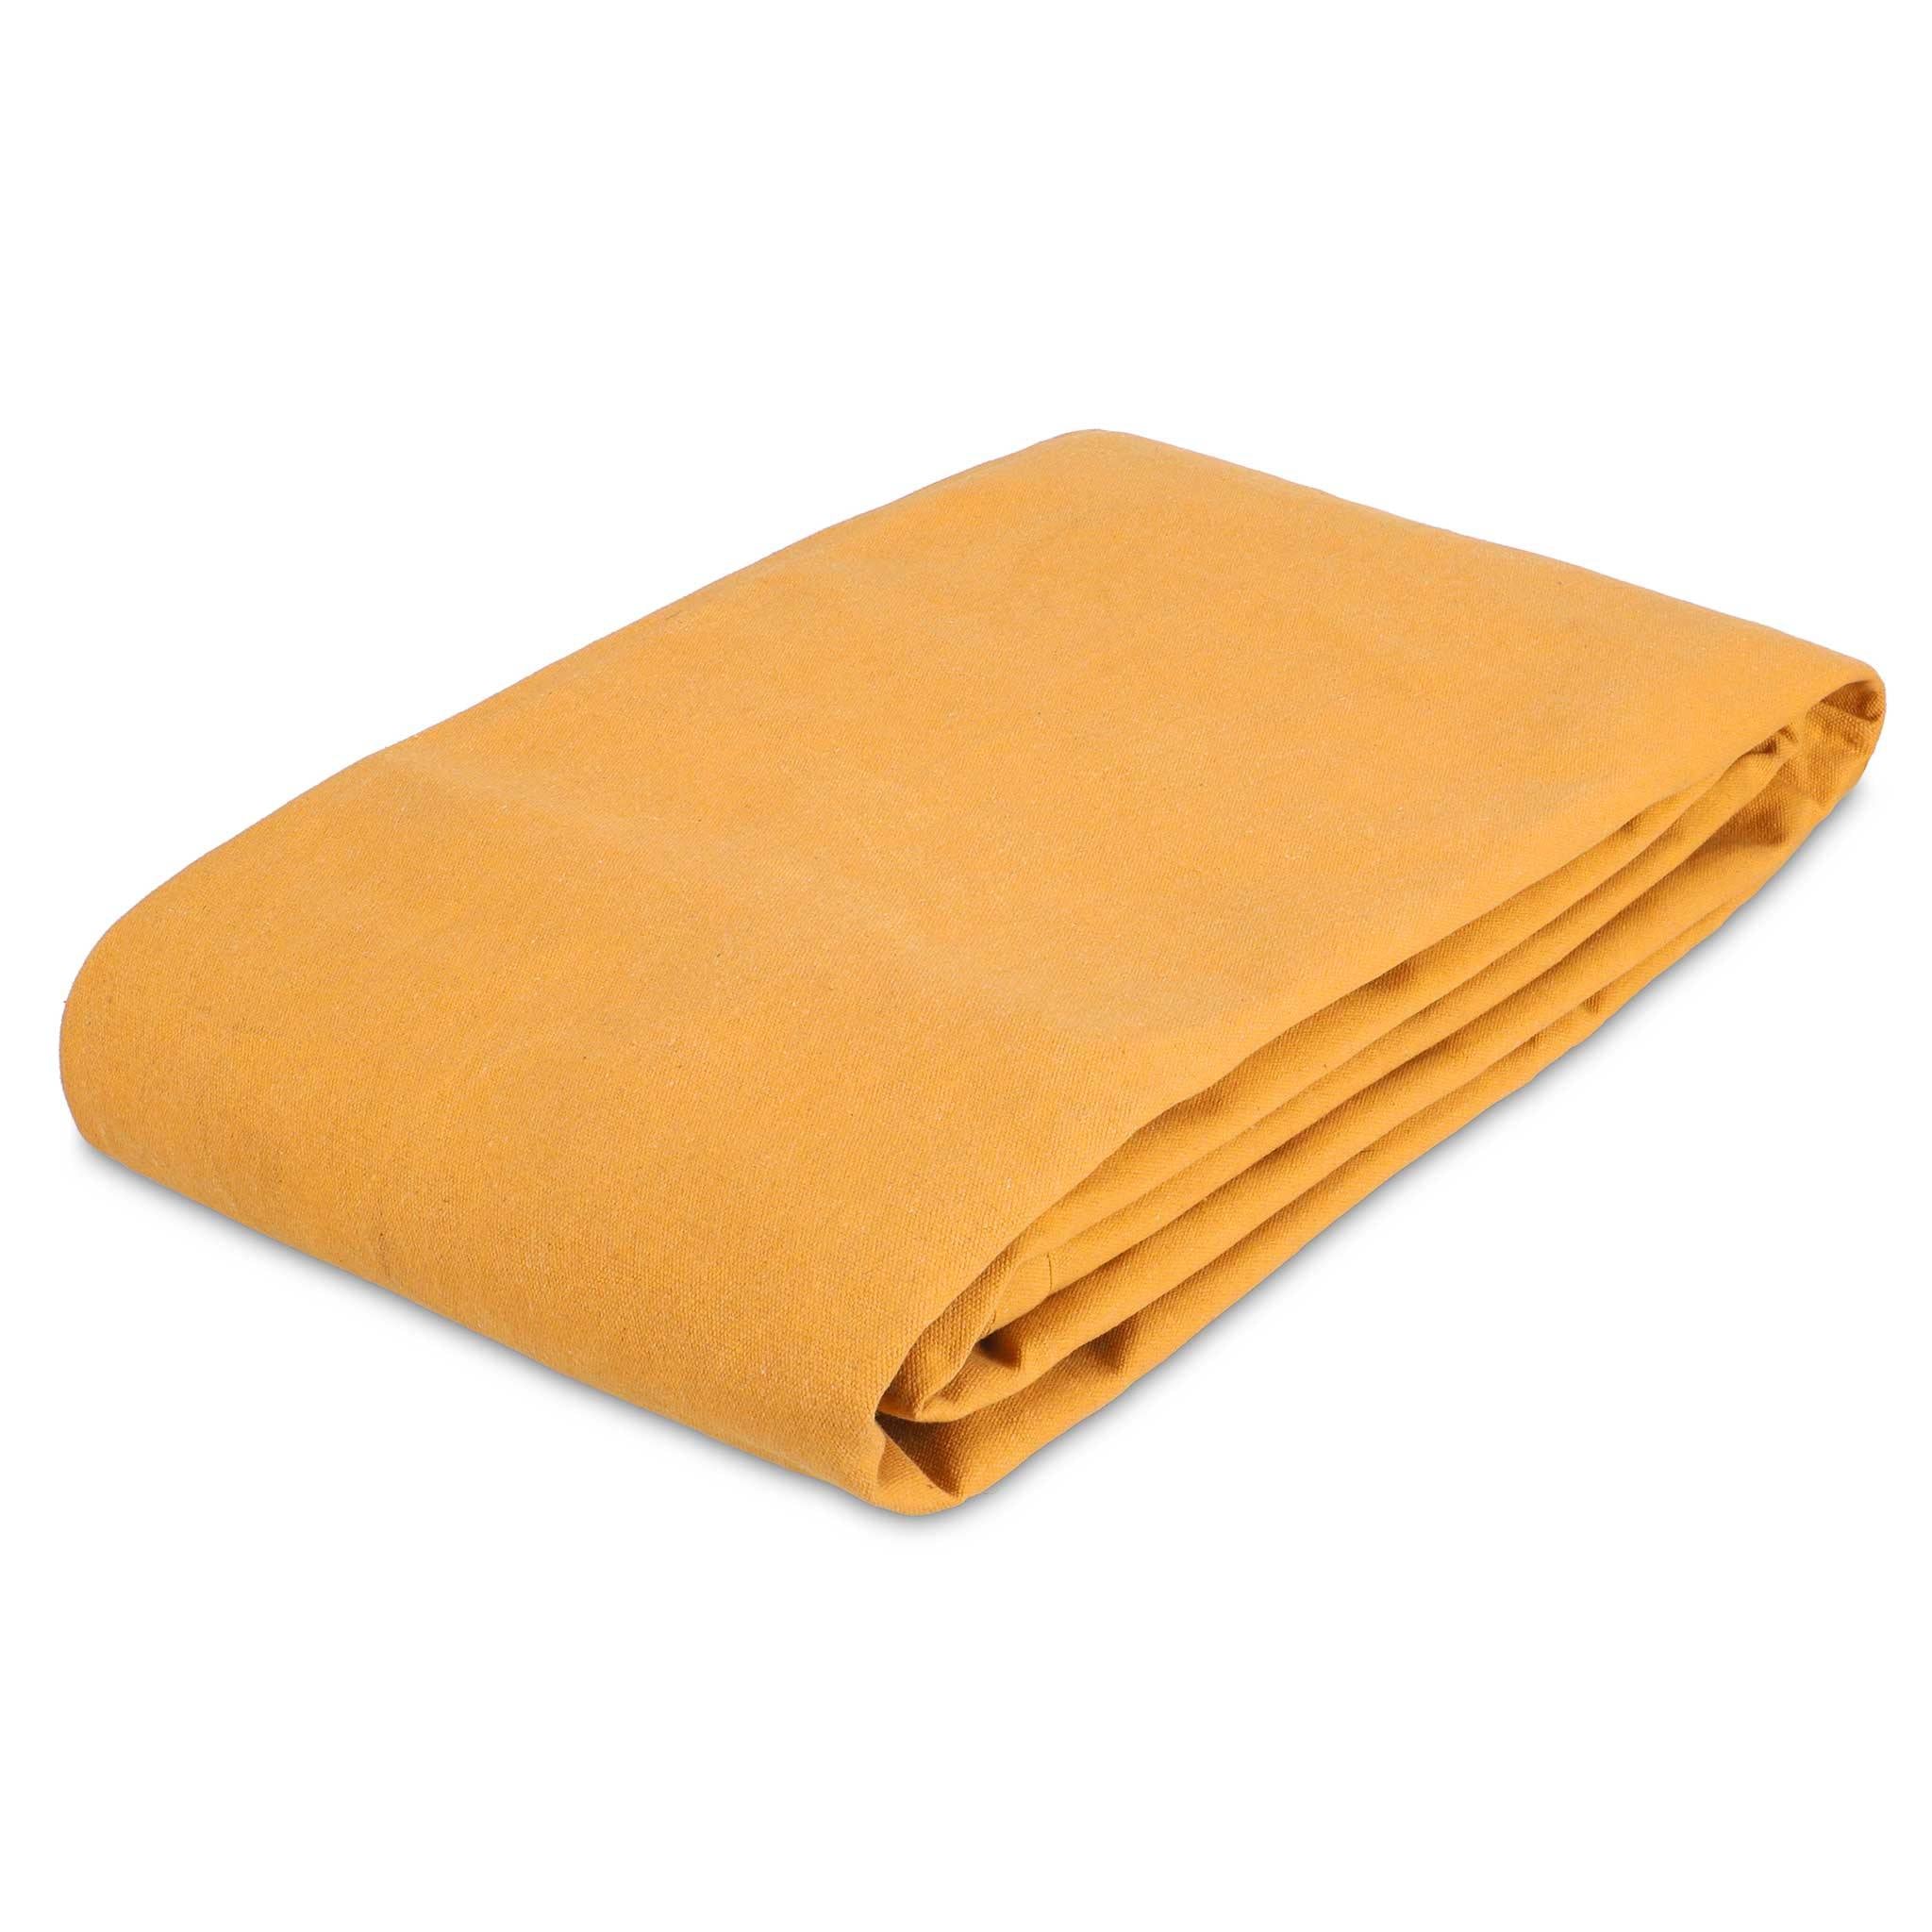 Plain Cotton Wax Coated Canvas, For Tarpaulins & Bags